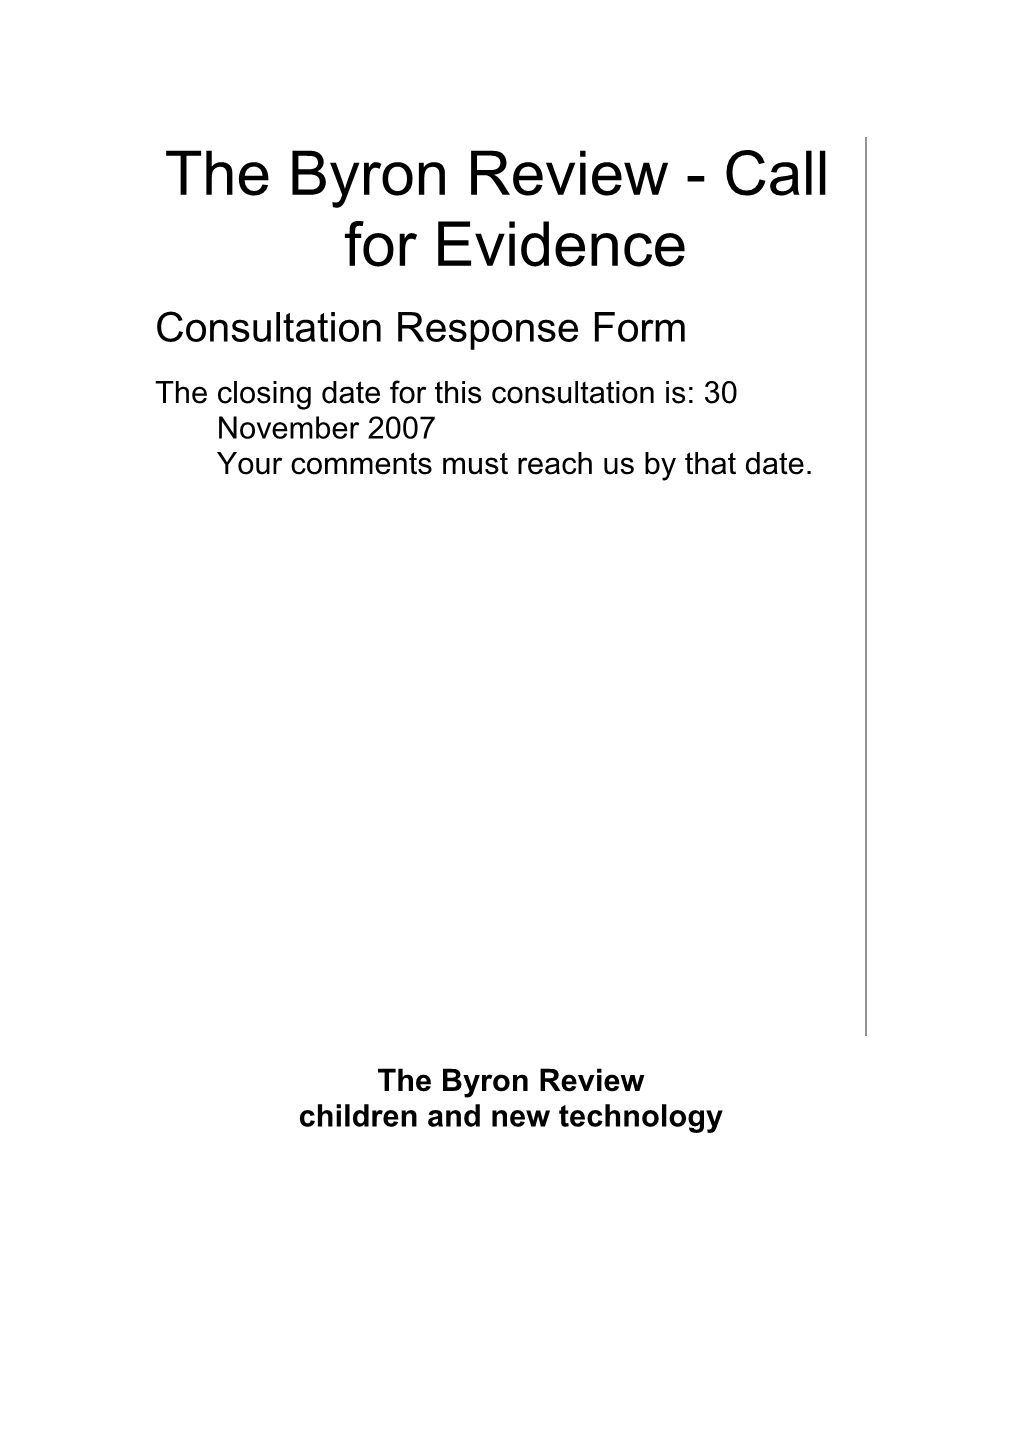 The Byron Review - Call for Evidence